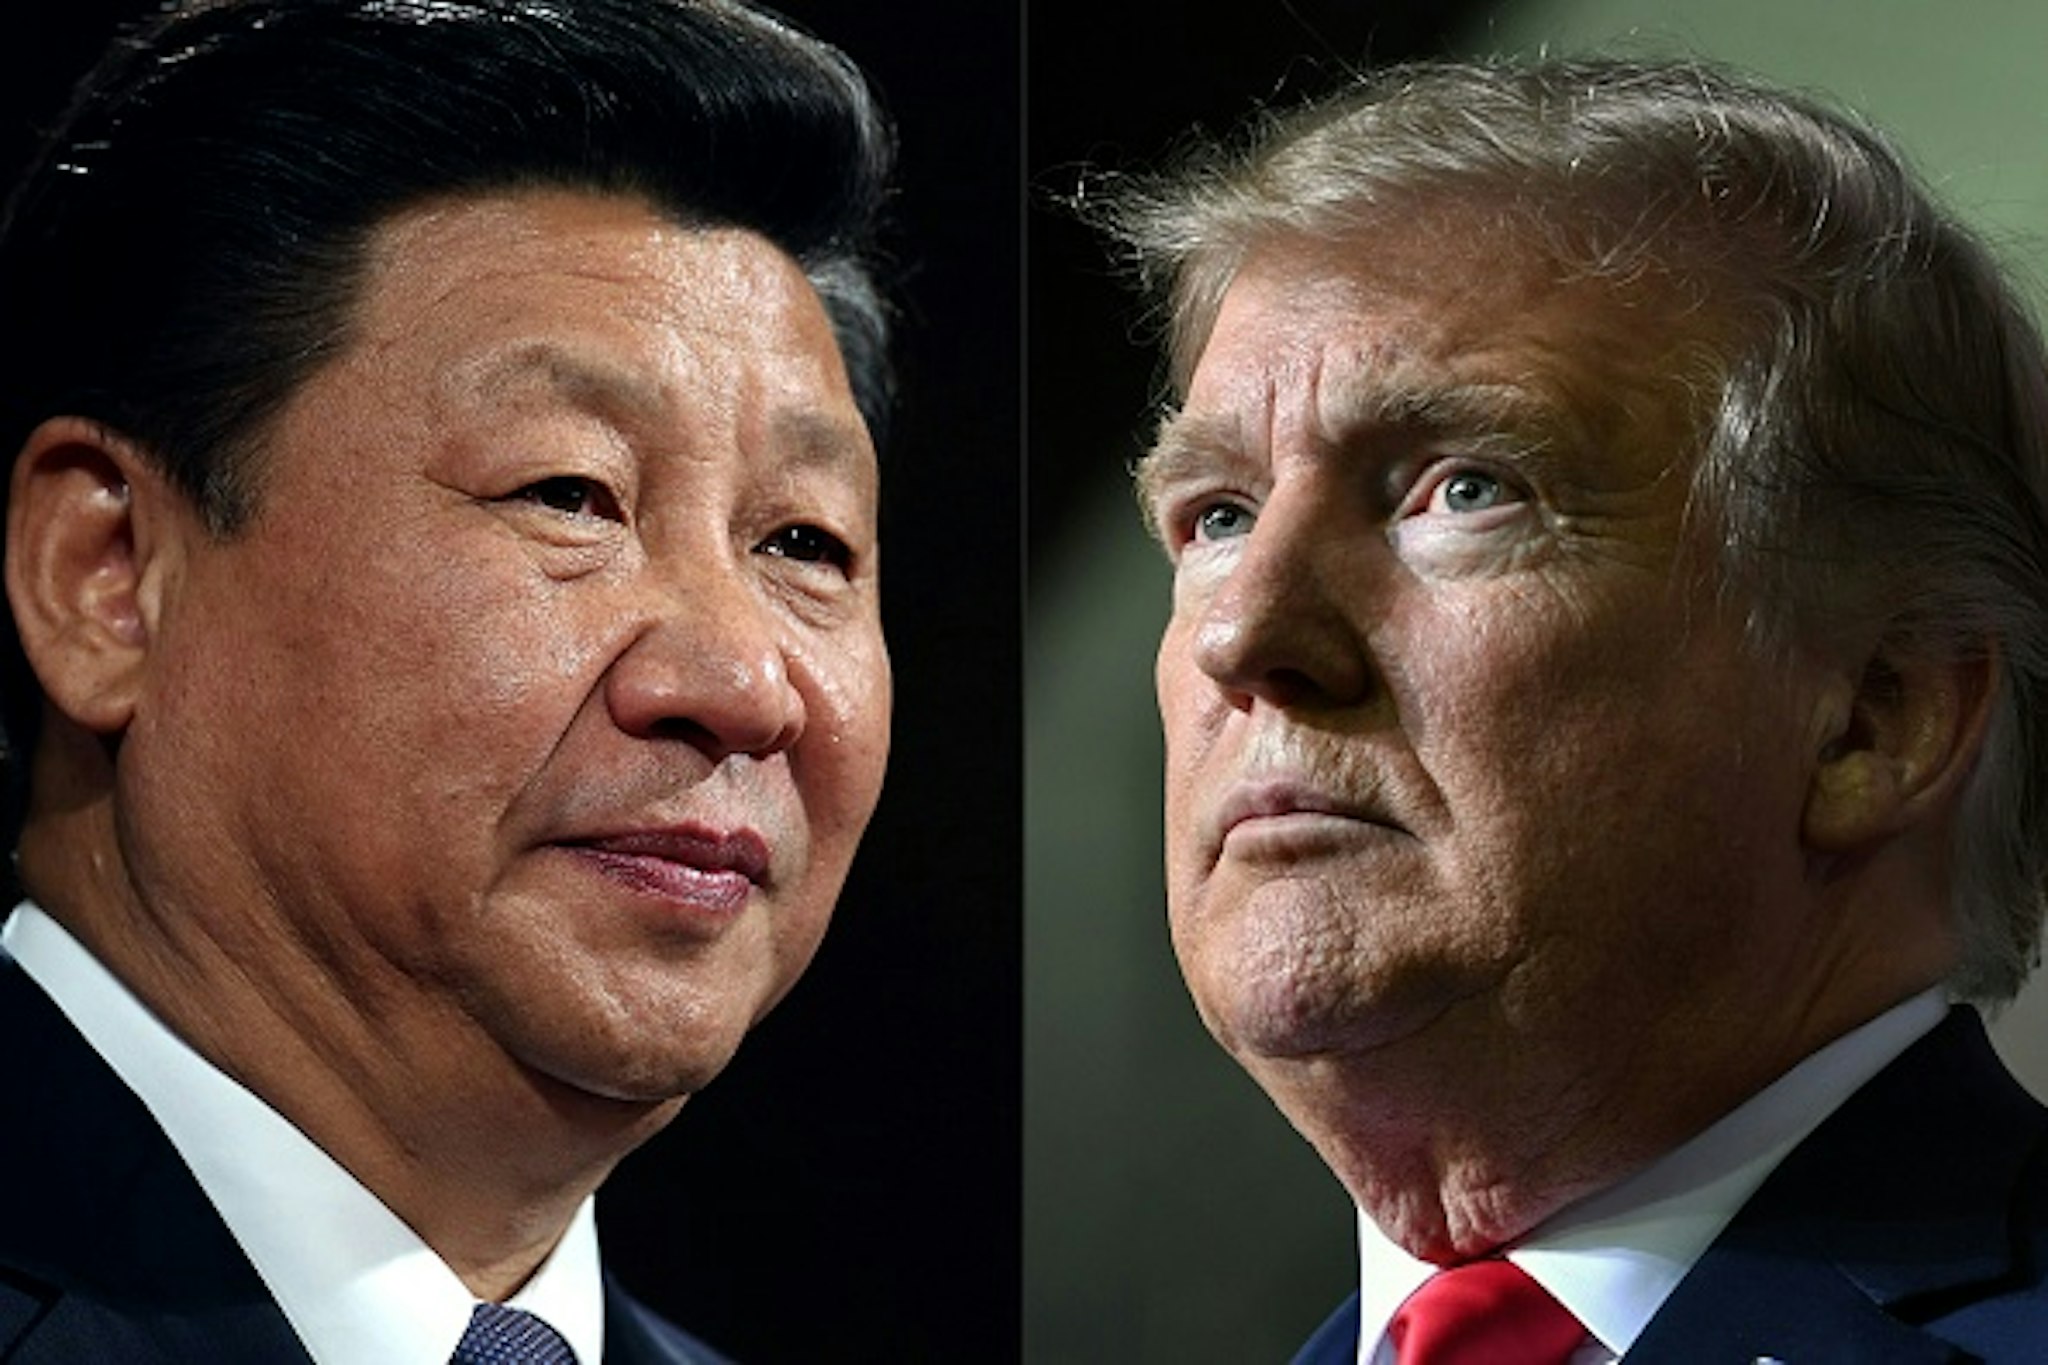 (COMBO) This combination of pictures created on May 14, 2020 shows recent portraits of China's President Xi Jinping (L) and US President Donald Trump. - US President Donald Trump said on May 14, 2020, he is no mood to speak with China's Xi Jinping, warning darkly he might cut off ties with the rival superpower over its handling of the coronavirus pandemic. "I have a very good relationship, but I just -- right now I don't want to speak to him," Trump told Fox Business.